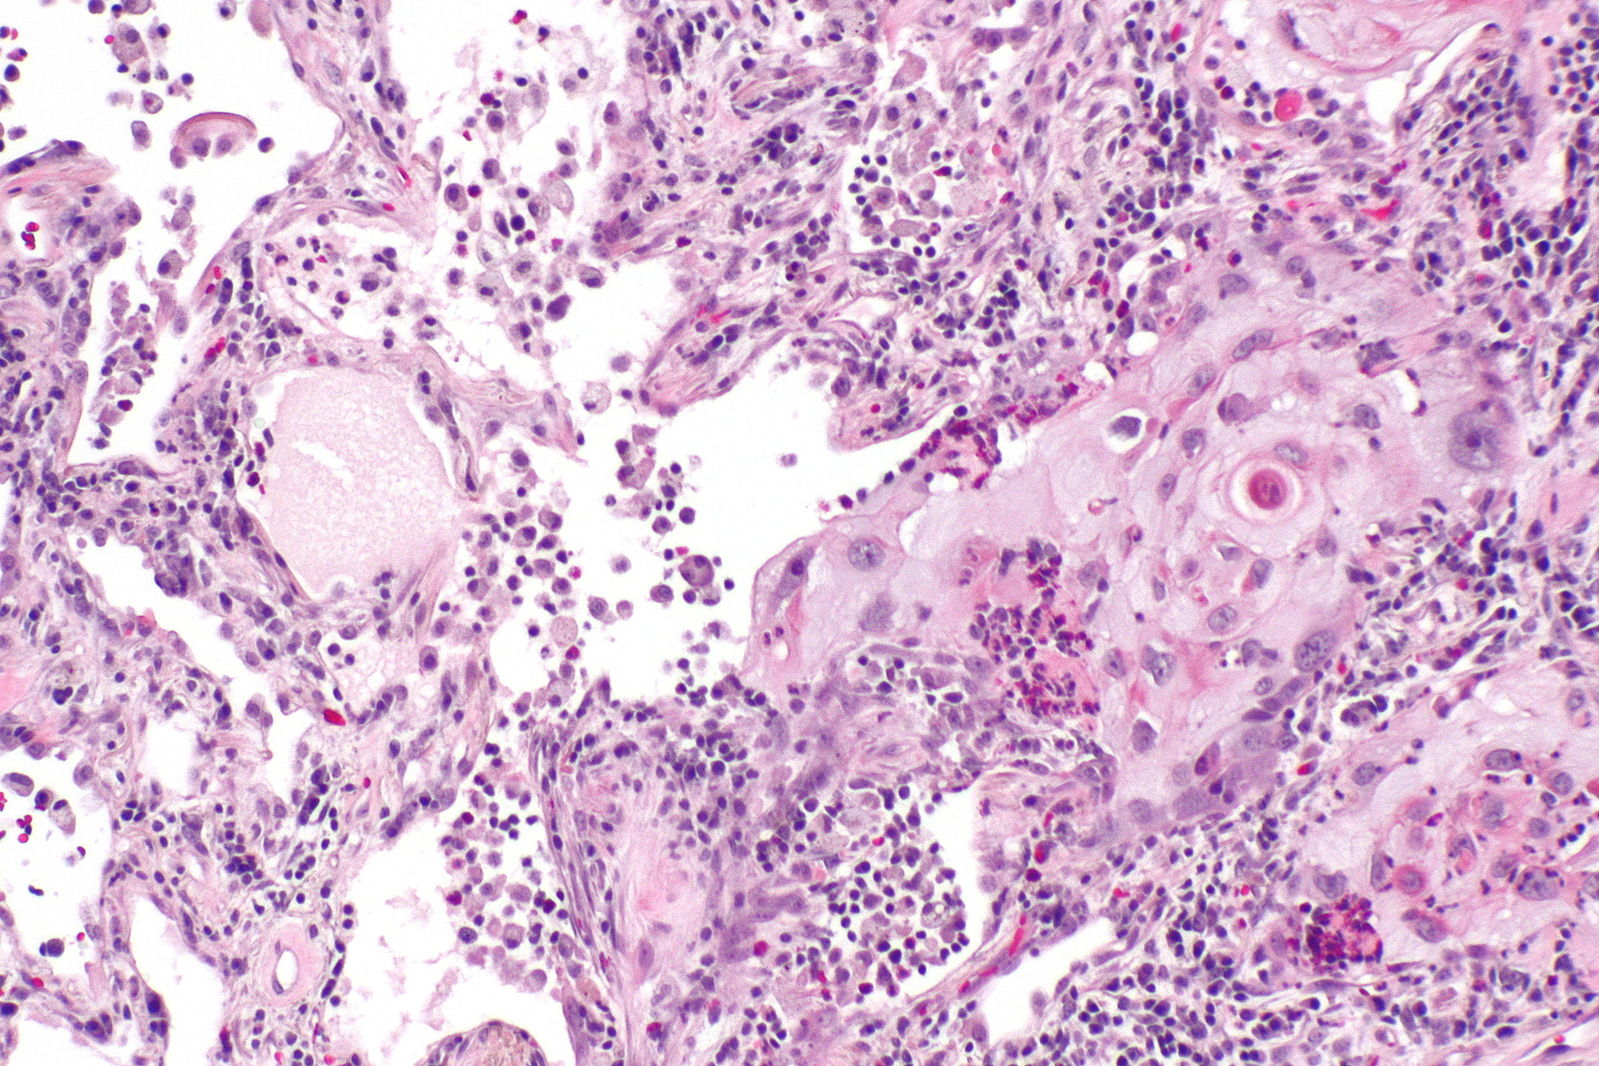 Micropathology: Squamous cell carcinoma of the lung. H&E stain via, Wikimedia Commons By Nephron [7]